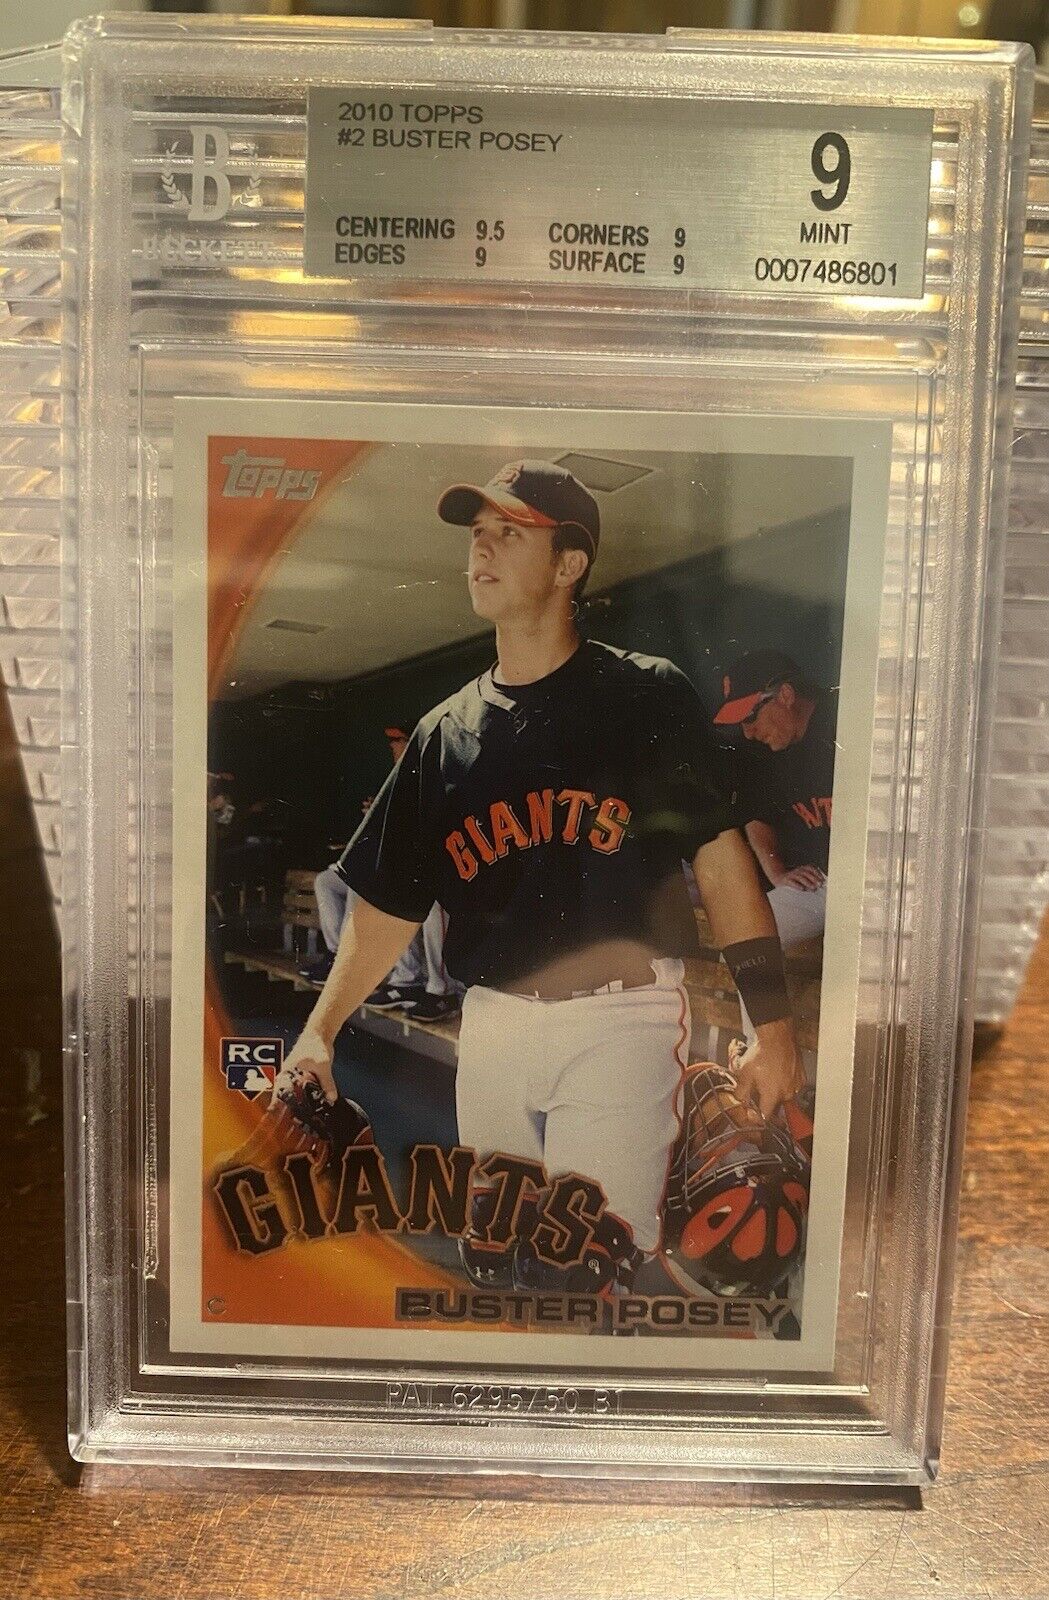 2010 Topps BUSTER POSEY #2 Rookie Card RC - BGS 9 Gem Mint